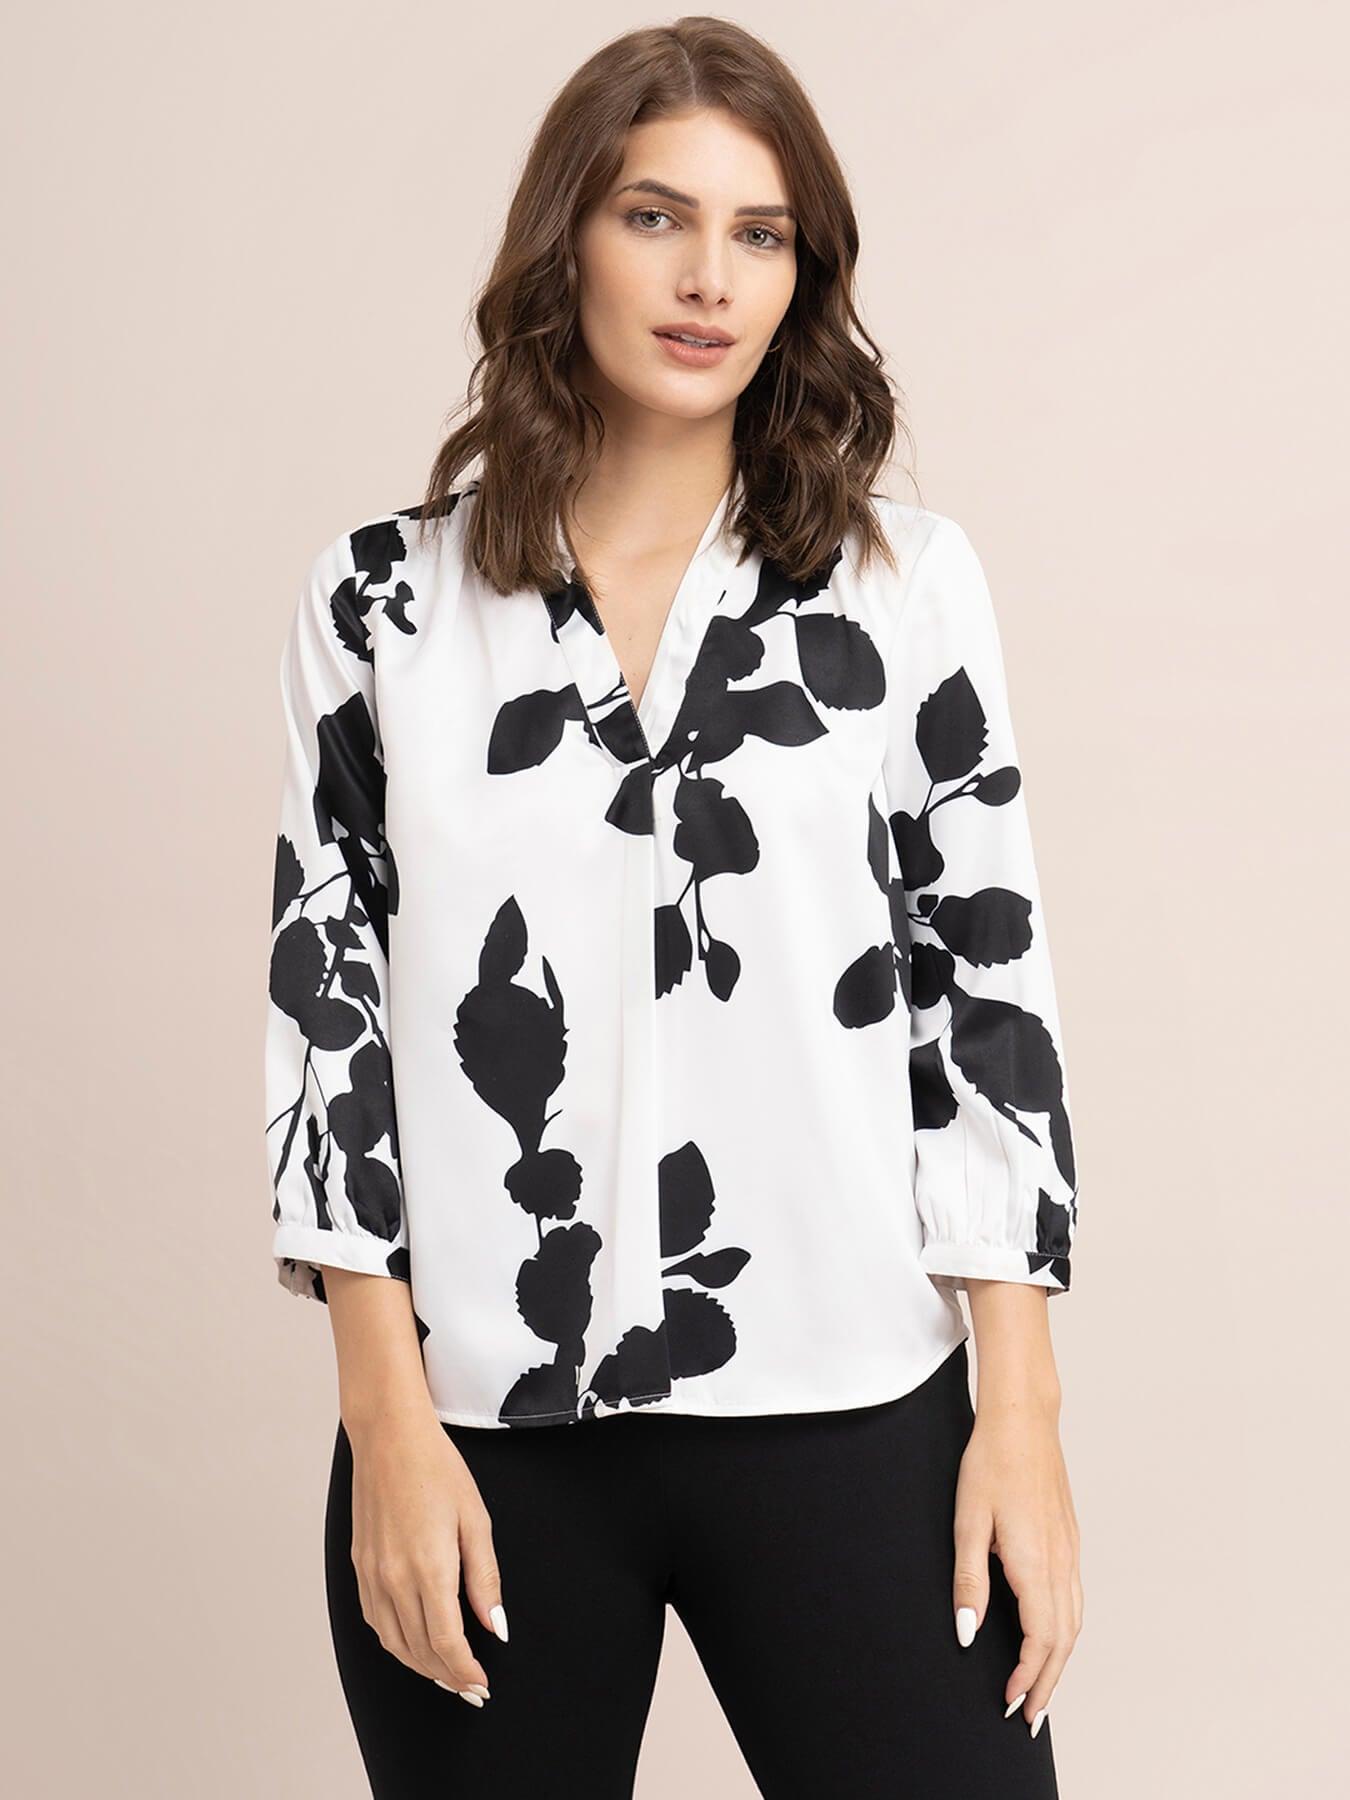 Satin Floral Print Top -  White And Black| Formal Tops